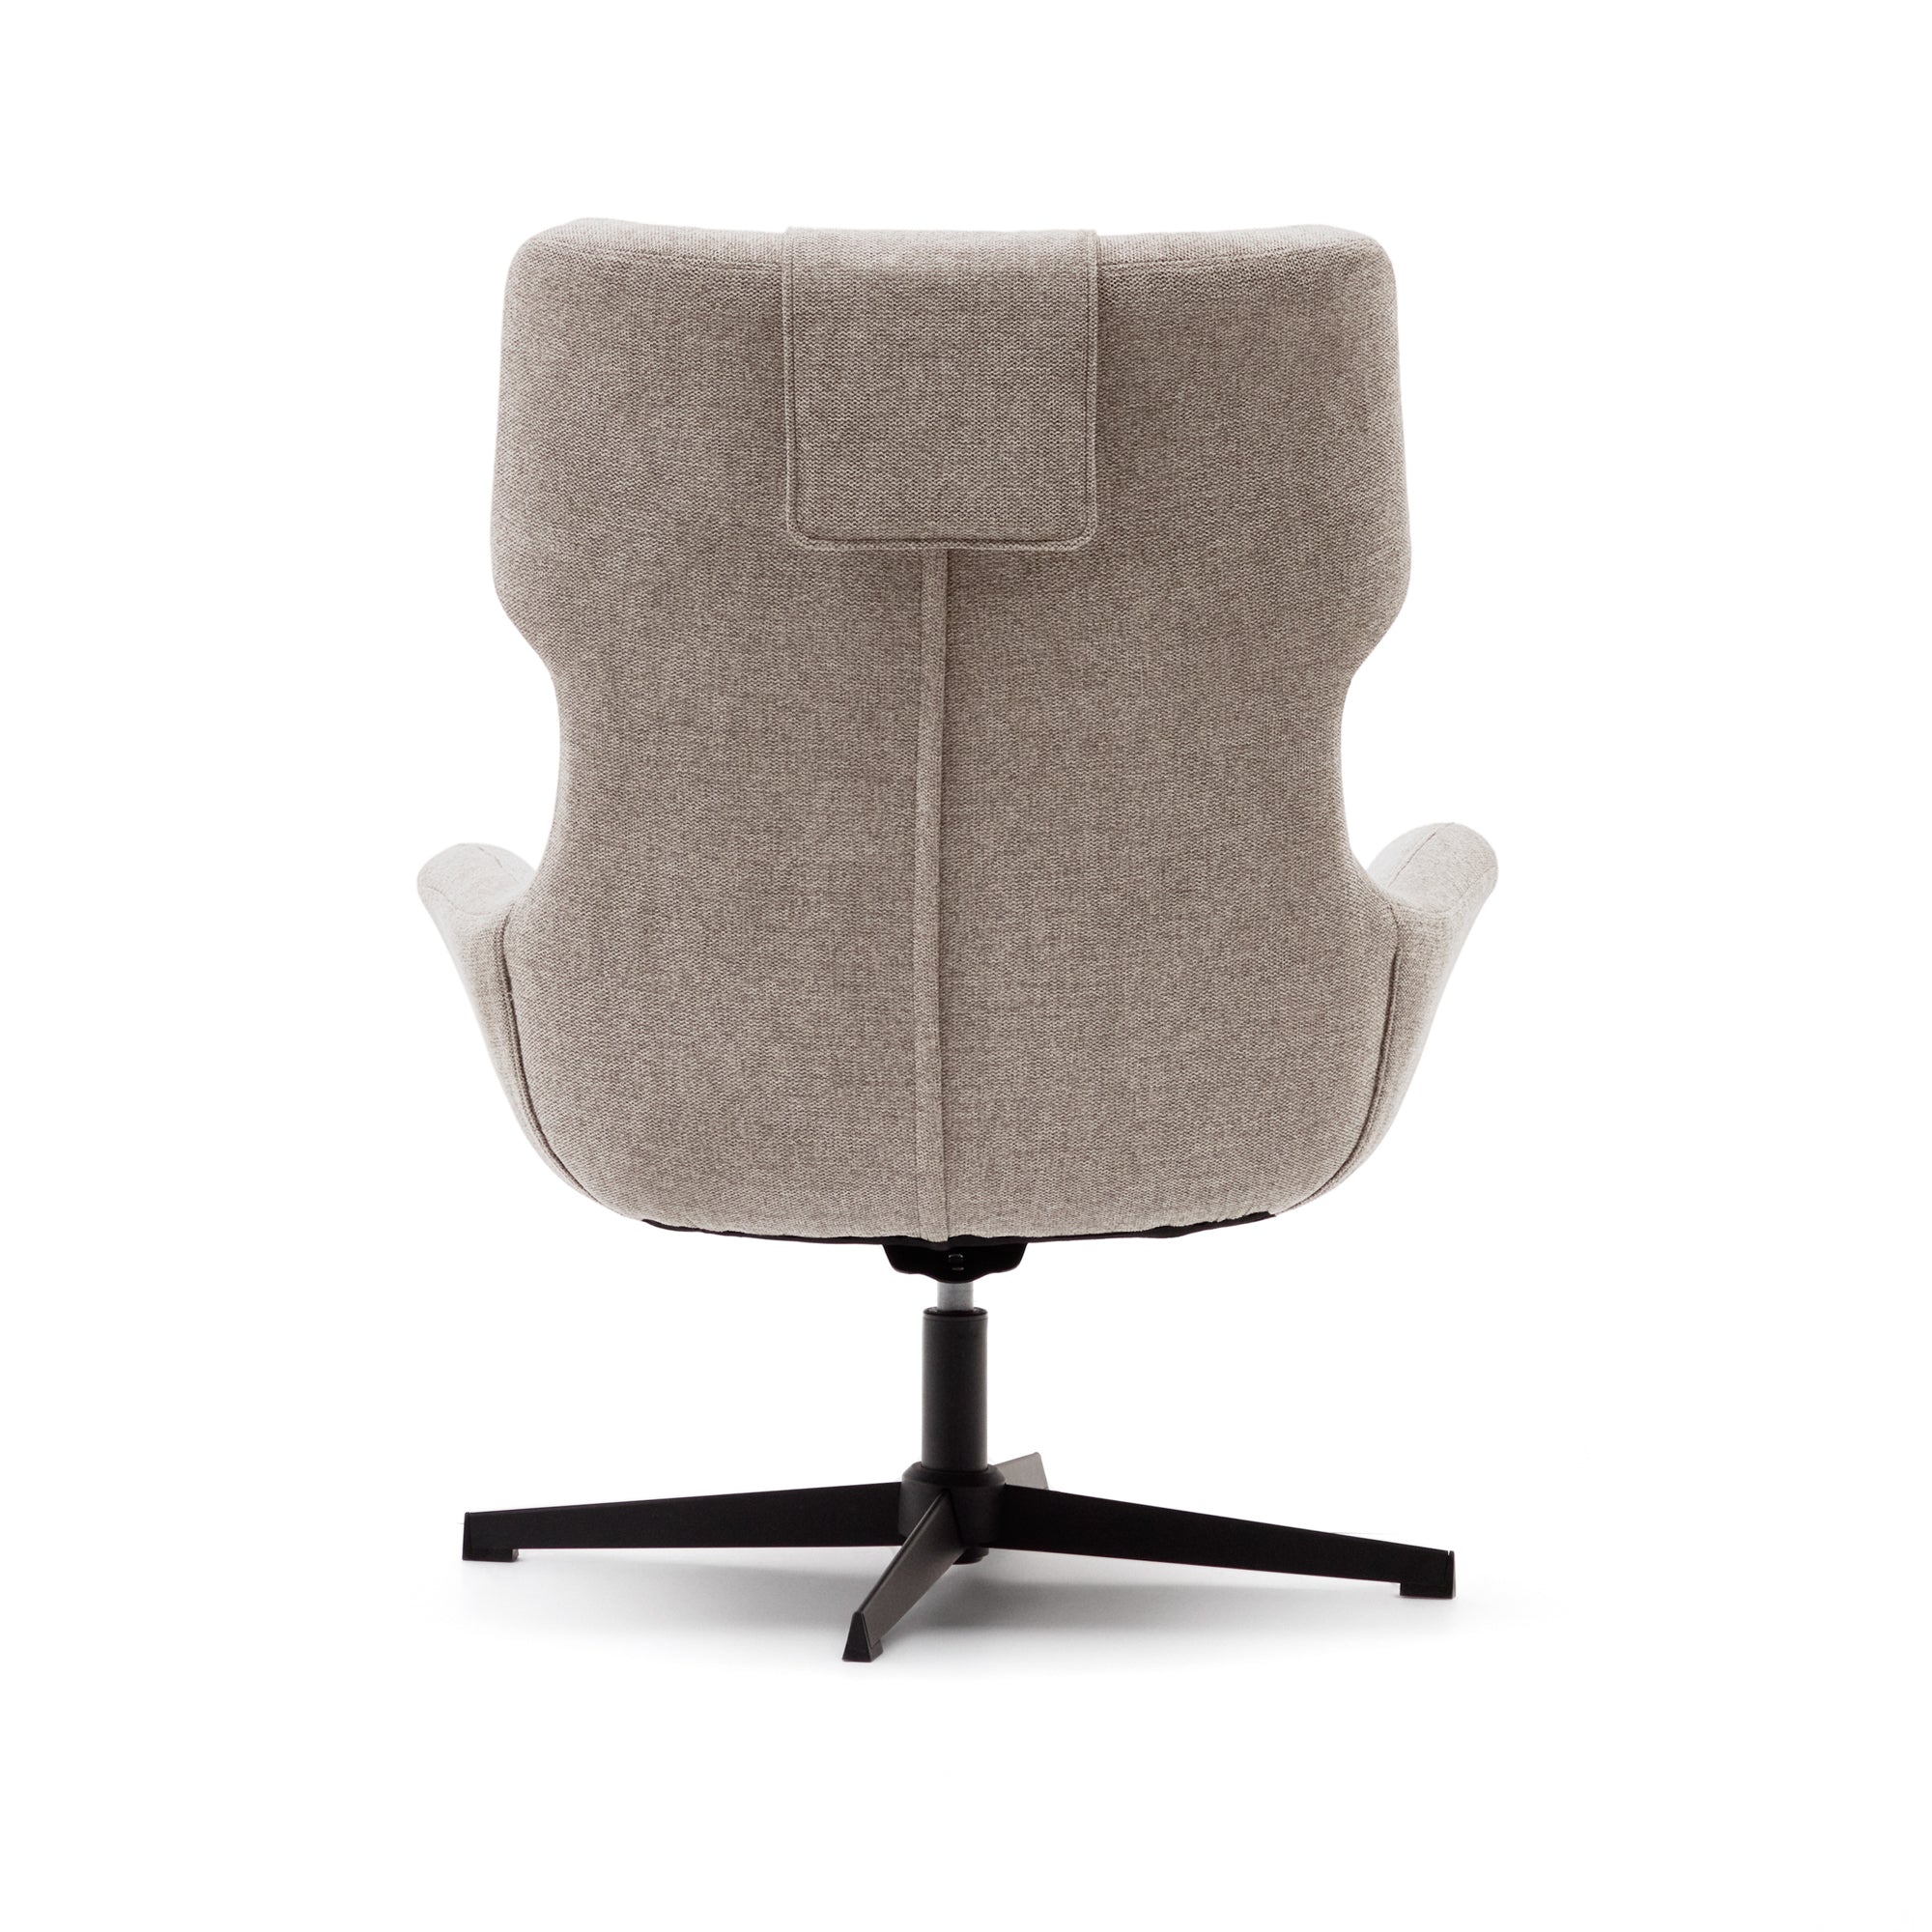 Zalina swivel armchair in beige chenille and steel with black finish